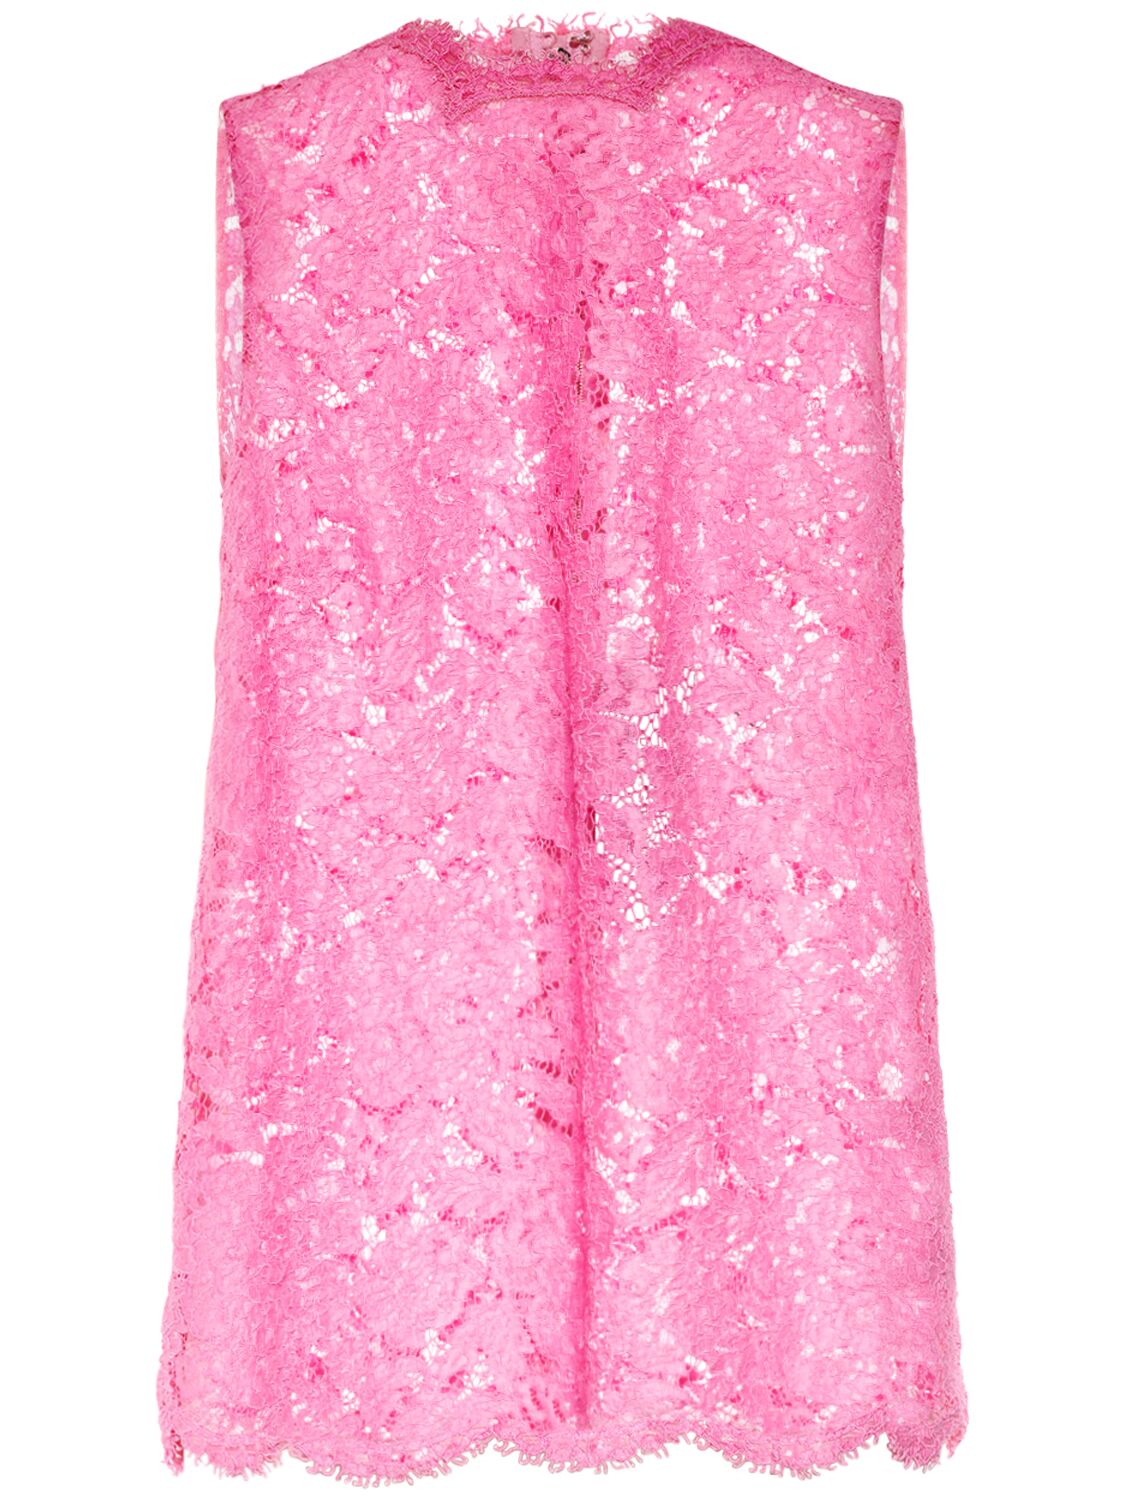 Dolce & Gabbana Floral & Dg Lace Sleeveless Top In Pink